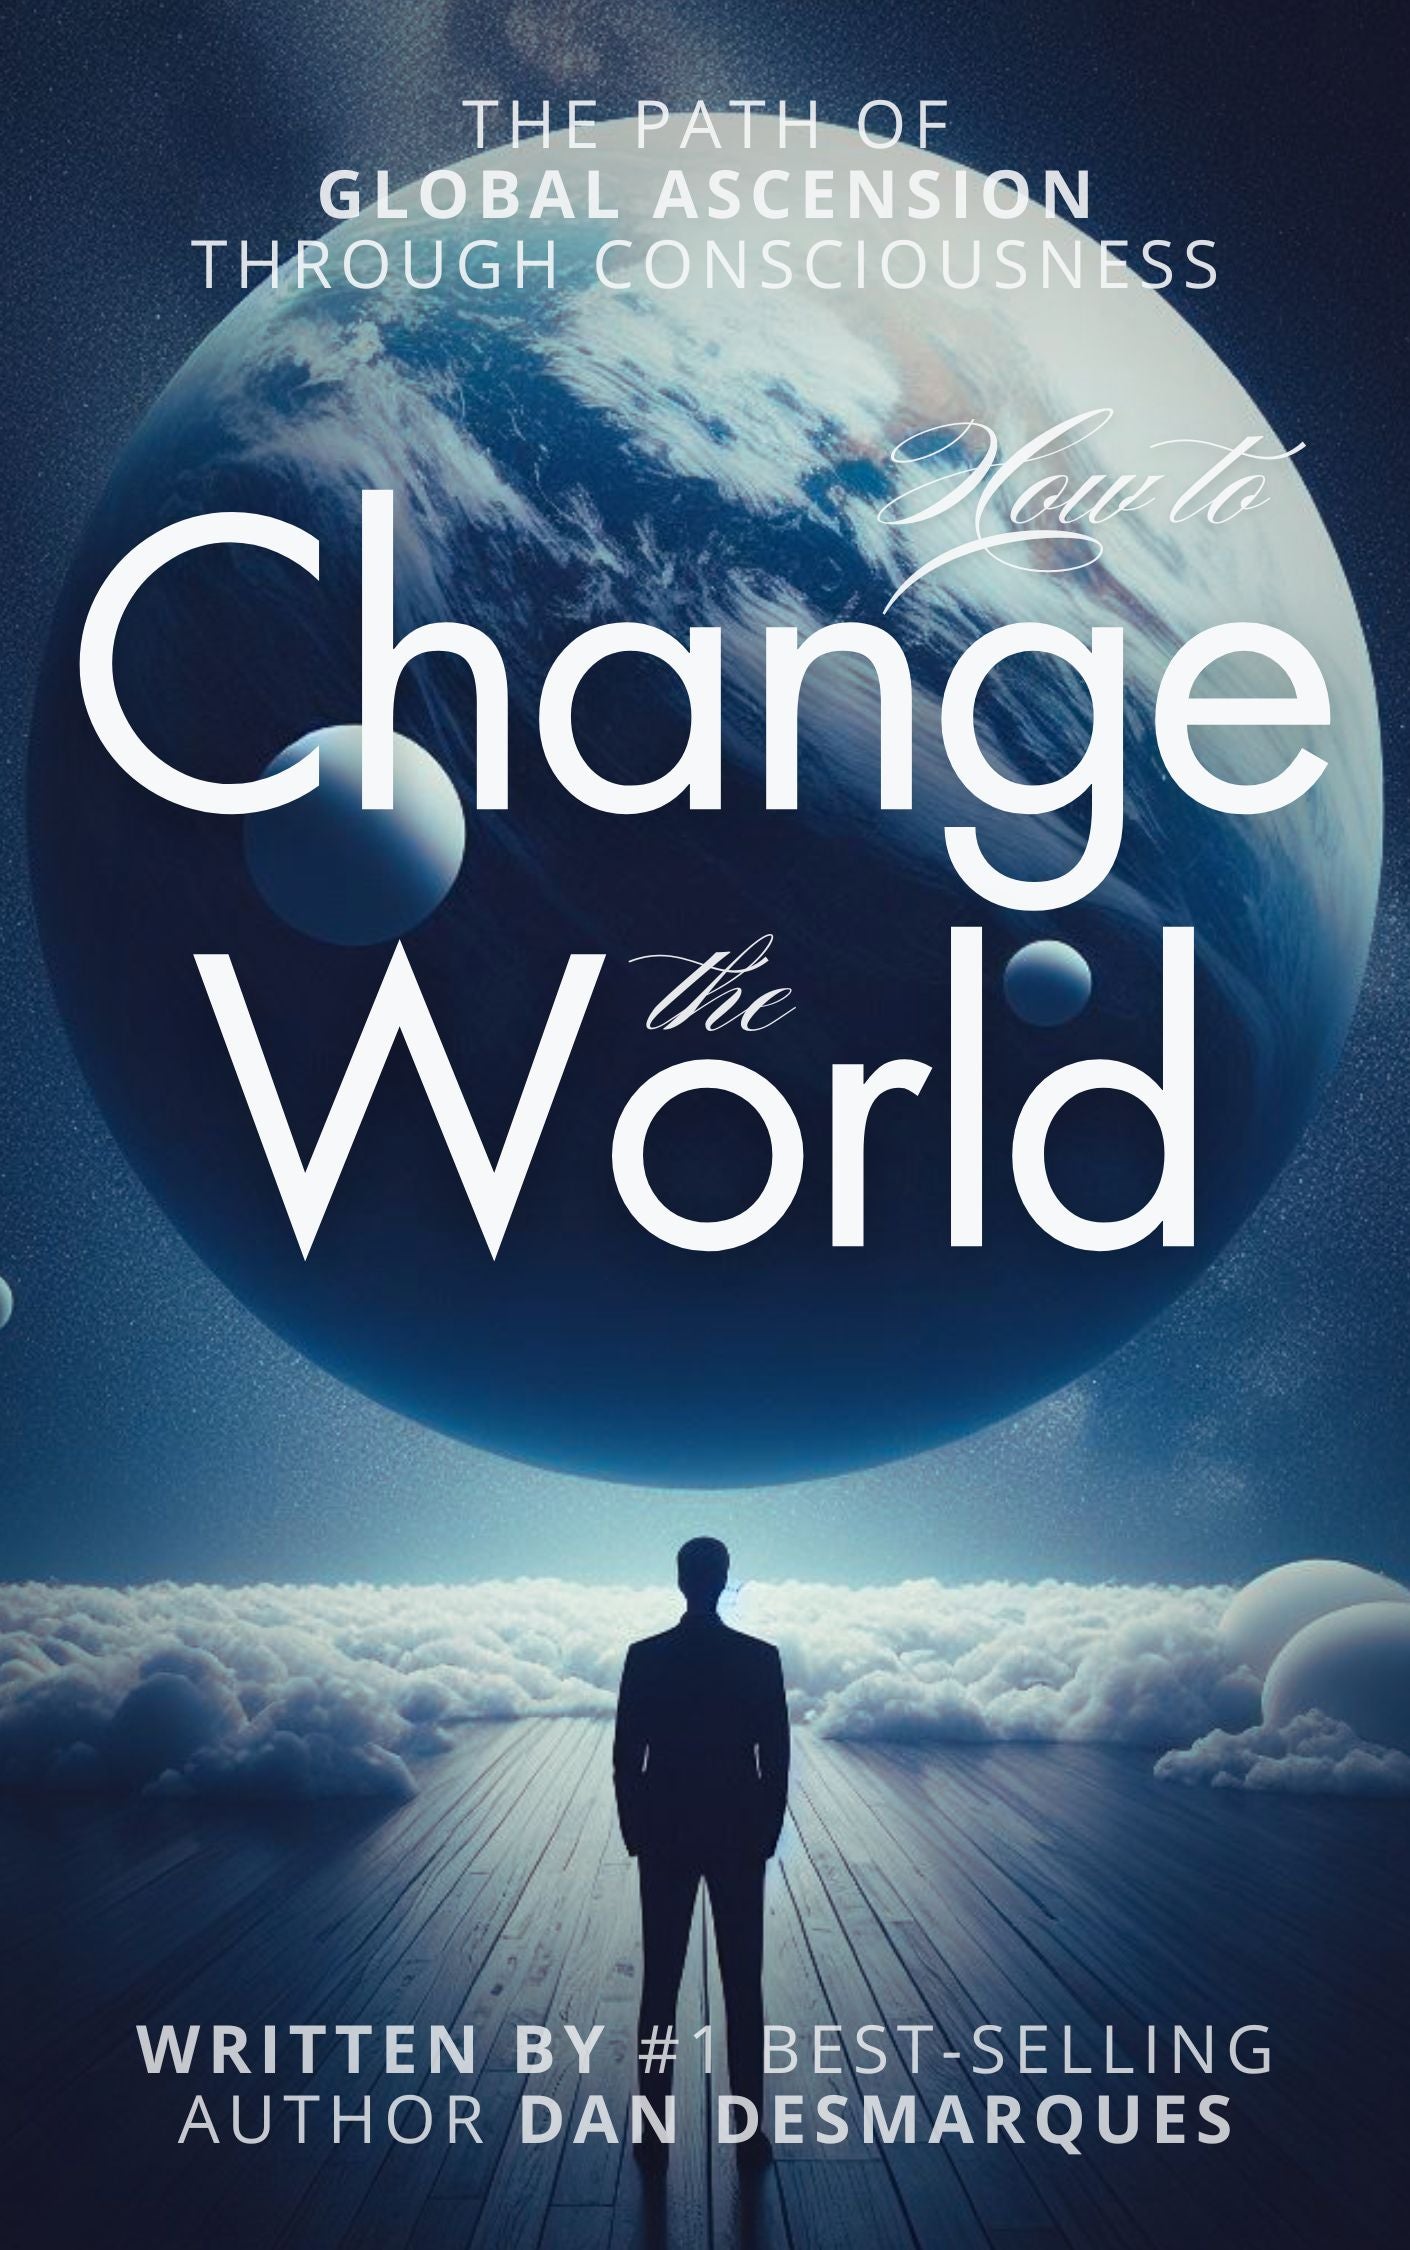 How to Change the World